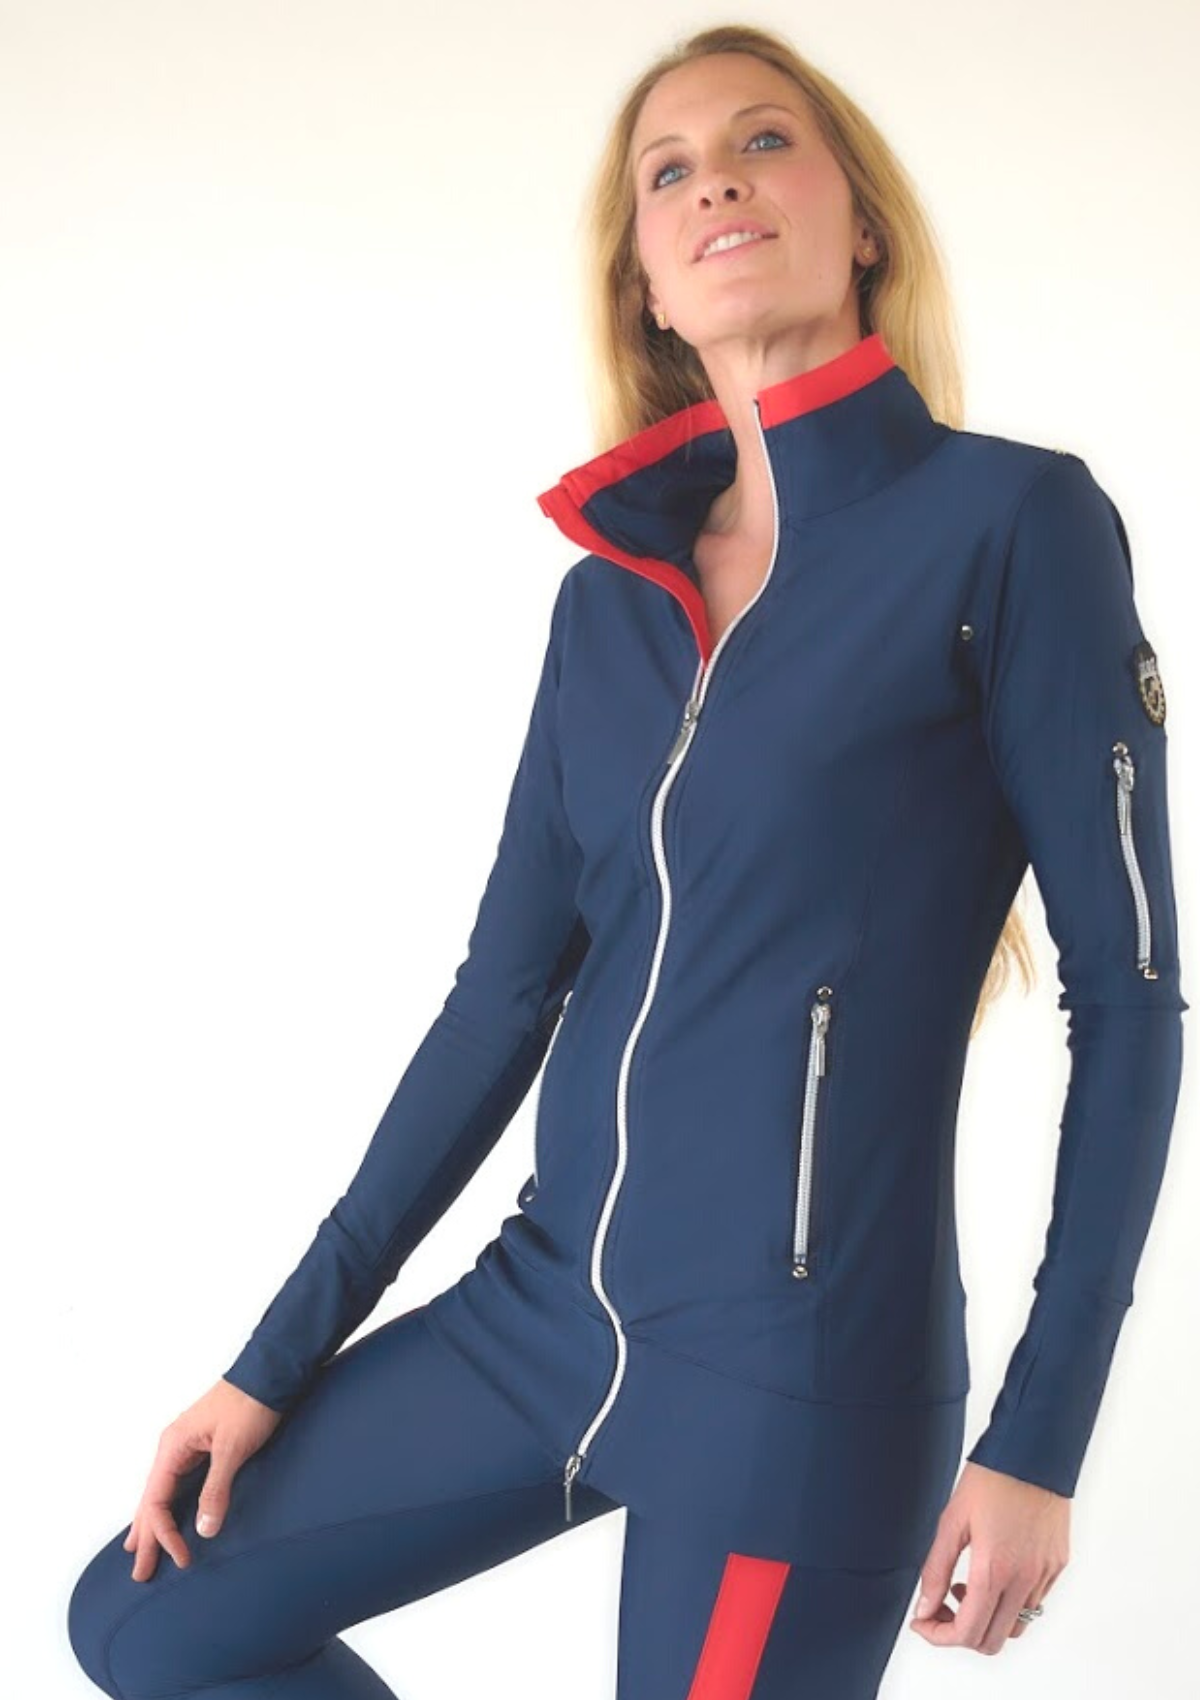 Woman wearing Sandy Navy full-zip jacket and matching navy leggings with red stripe